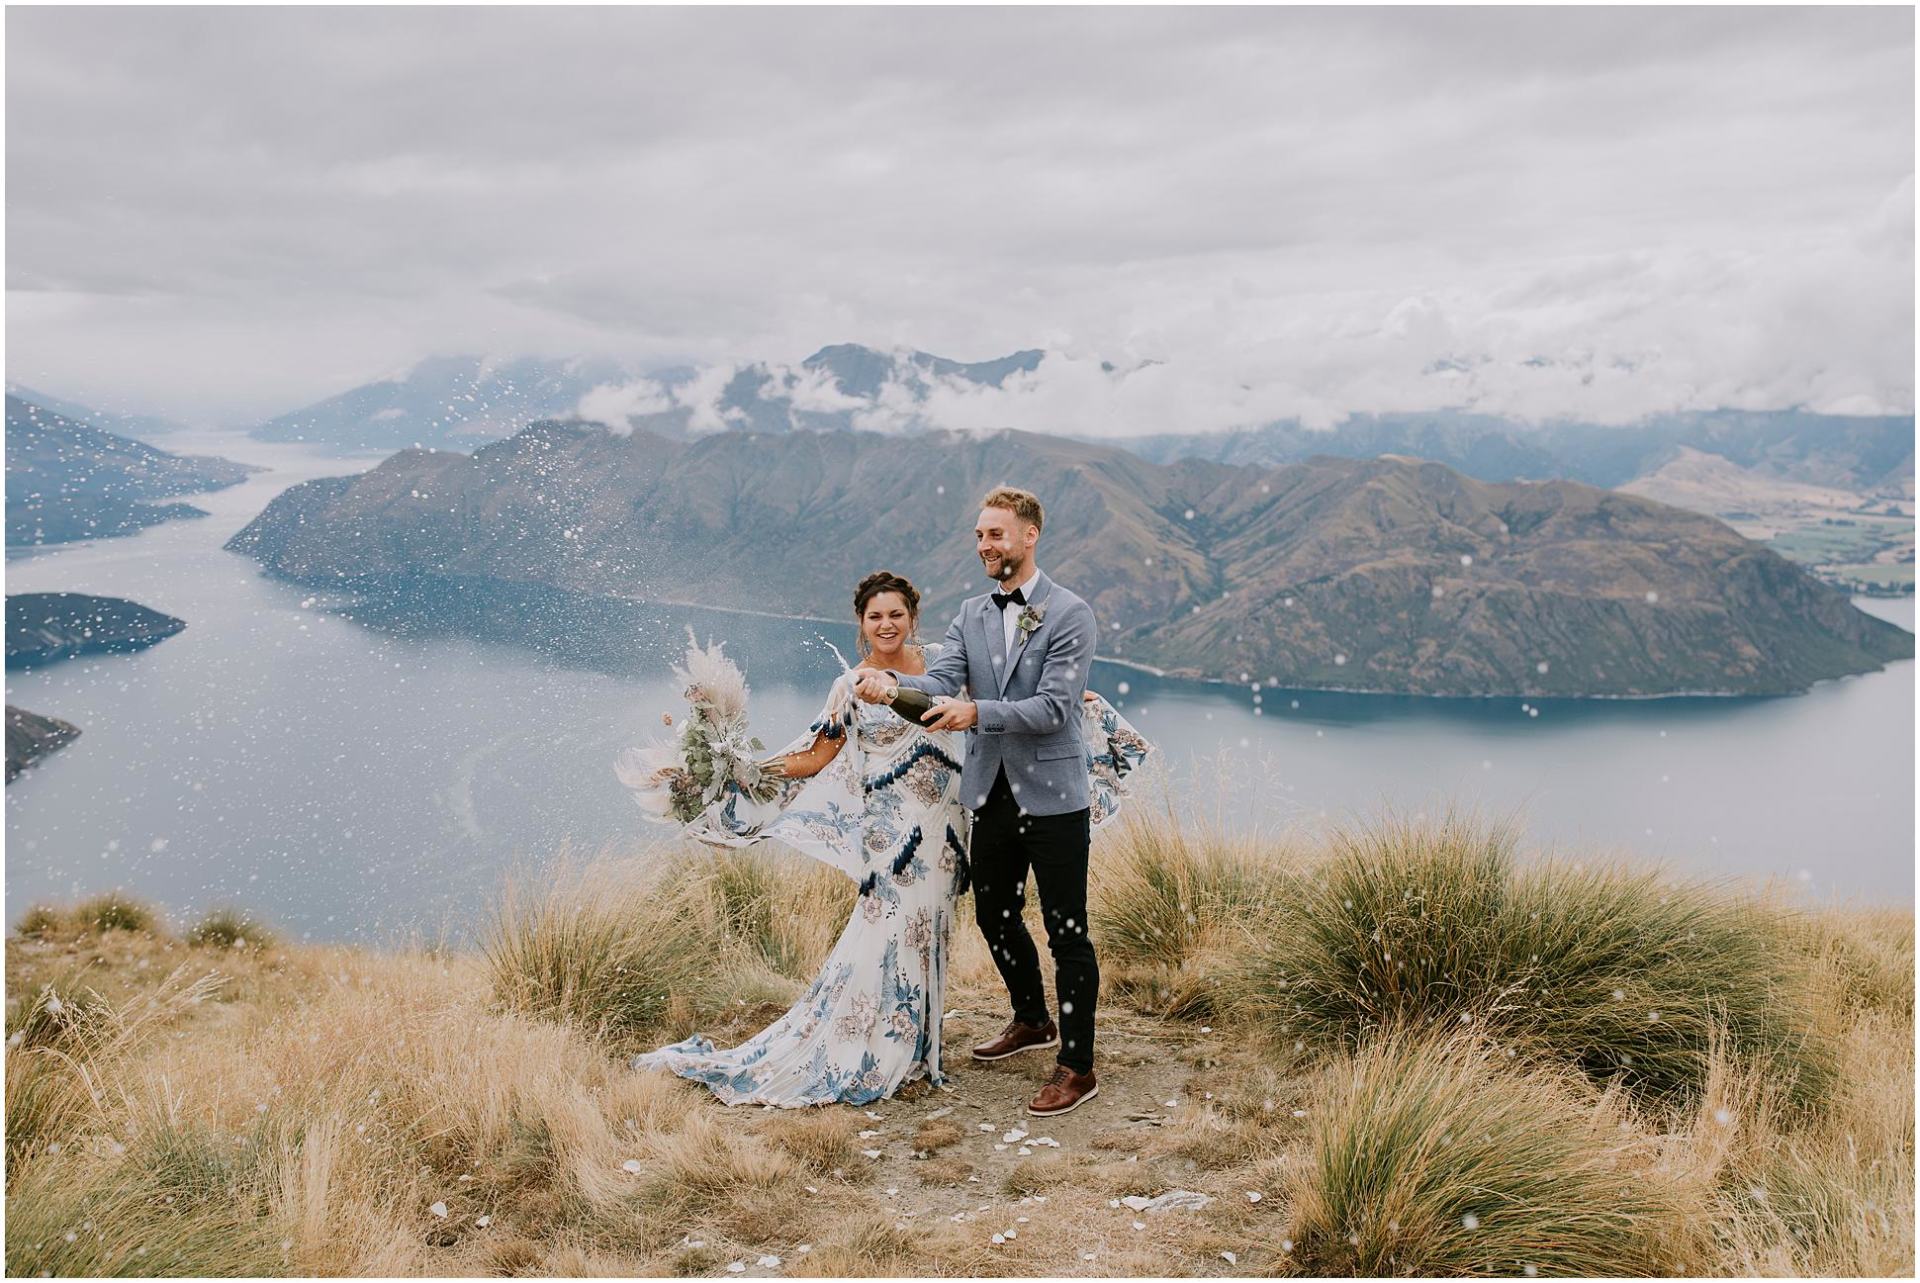 Charlotte Kiri Photography - Wedding Photography of a bride wearing a blue floral dress with tassels, and her groom wearing a grey jacket and black pants as they smile and open up a champagne bottle and spray the bubbles in the air in front of a peak overlooking lakes and mountains in Wanaka, New Zealand.